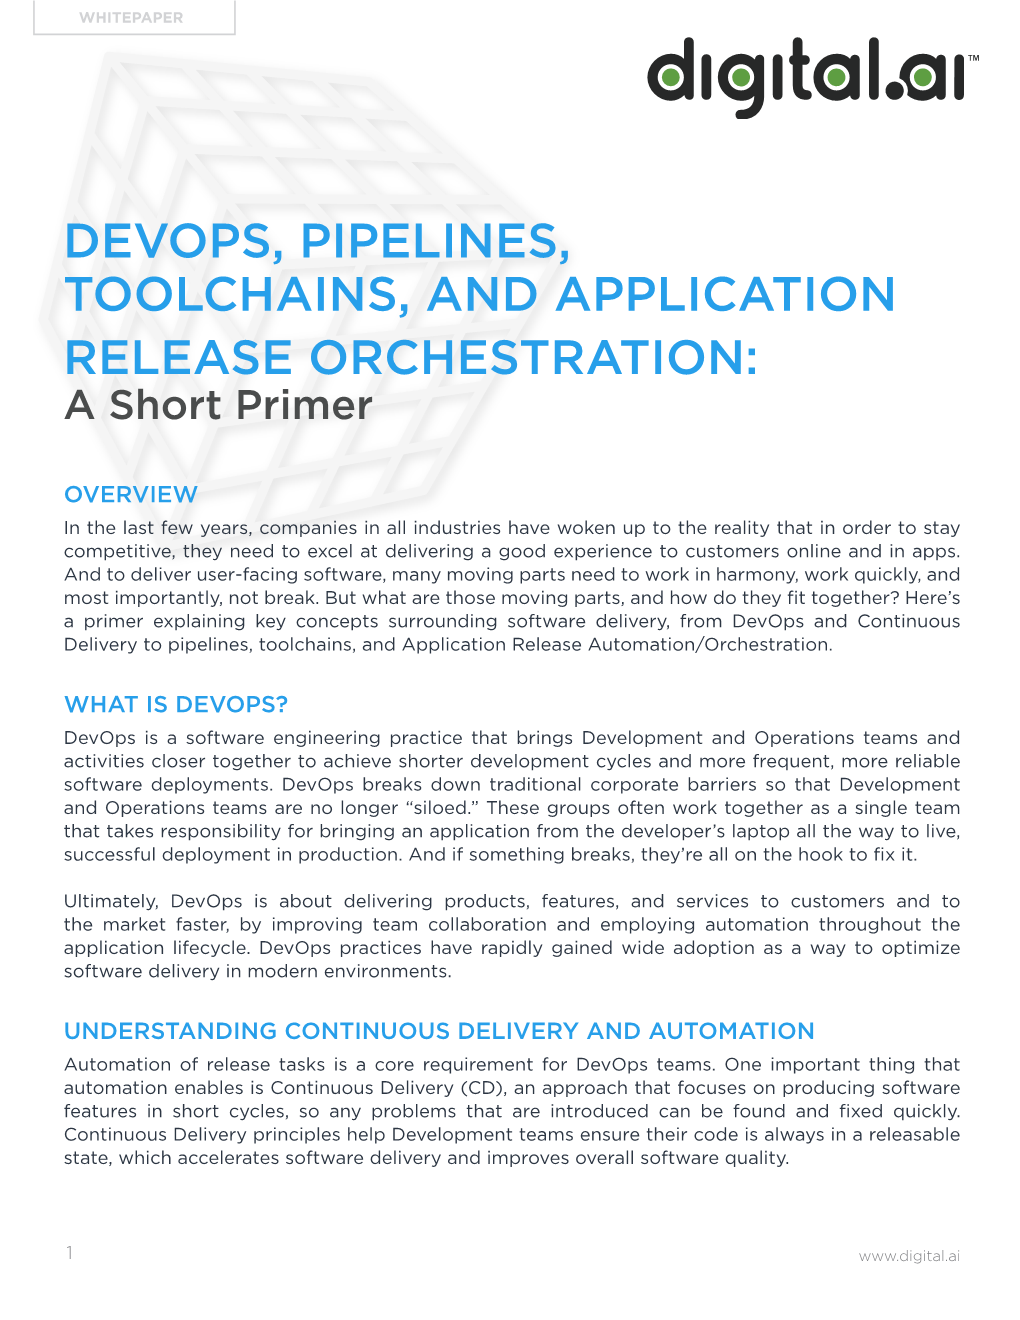 DEVOPS, PIPELINES, TOOLCHAINS, and APPLICATION RELEASE ORCHESTRATION: a Short Primer